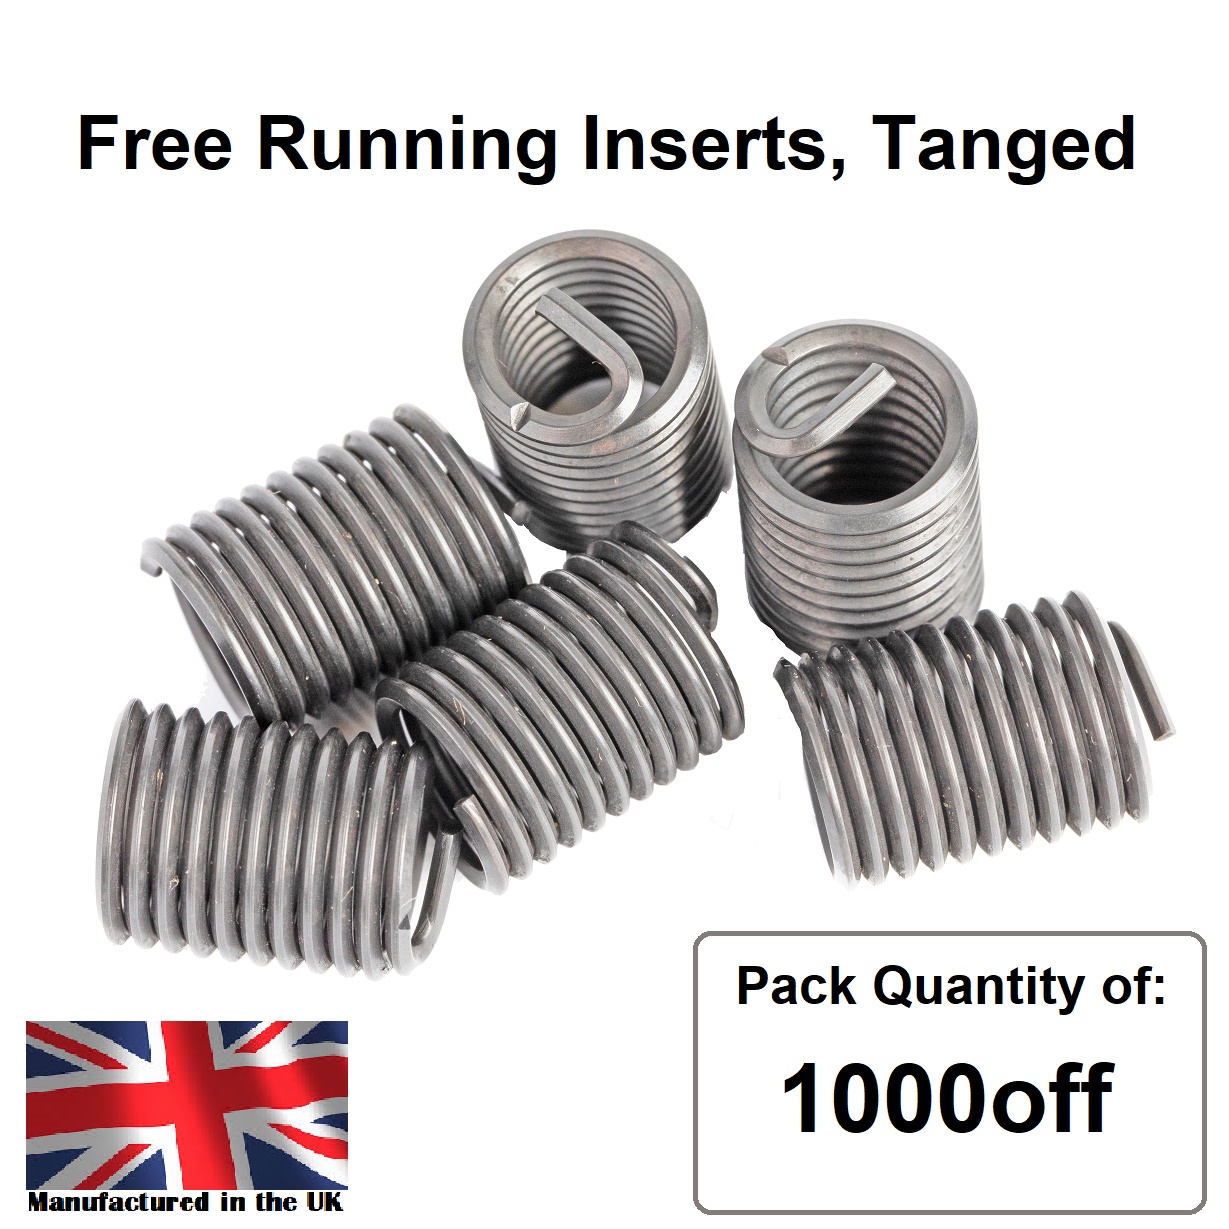 M12 x 1.75 x 3D Metric Coarse, Free Running, Tanged, Wire Thread Repair Insert, 304/A2 Stainless (Pack 1000)